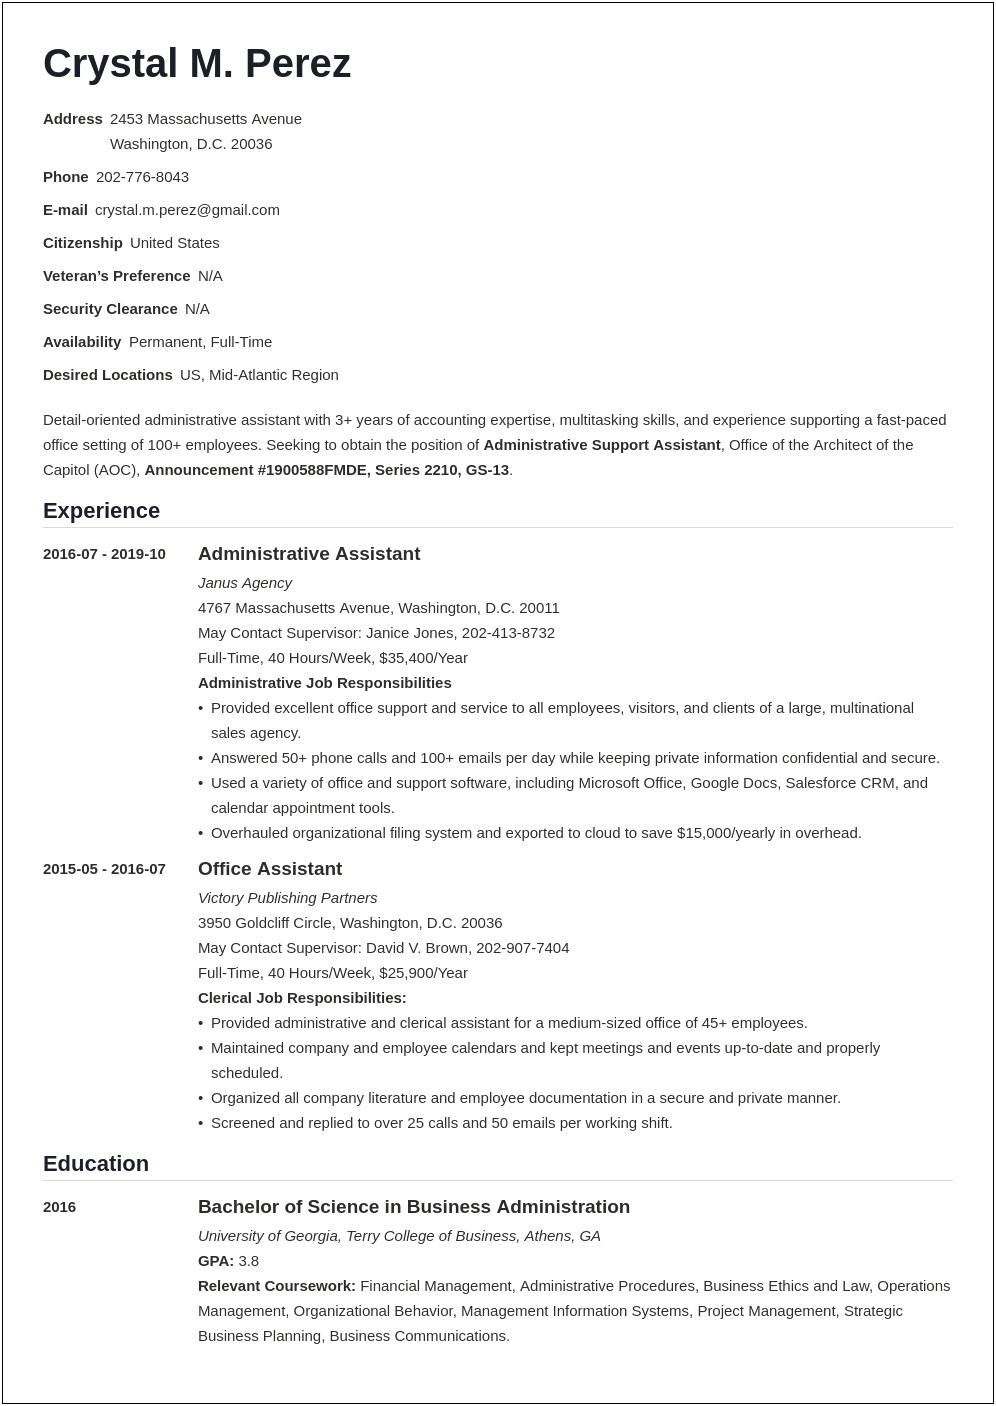 Example Of An Excellent Federal Resume